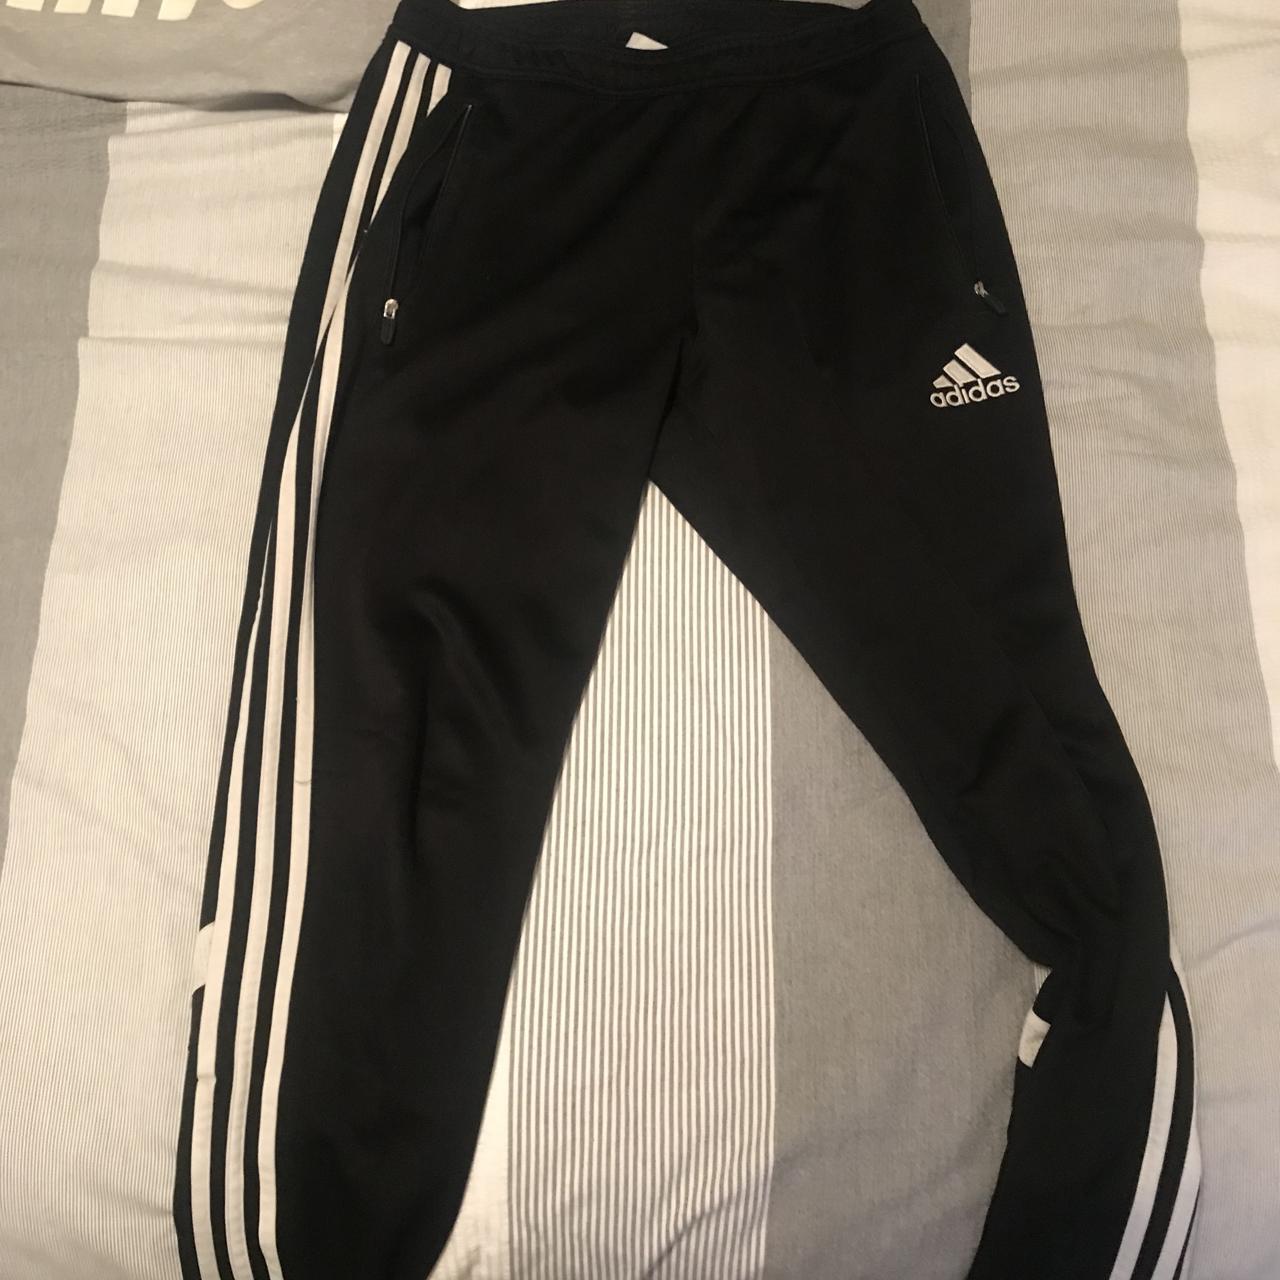 Adidas tracksuit bottoms / Small / 8.5/10 condition - Depop